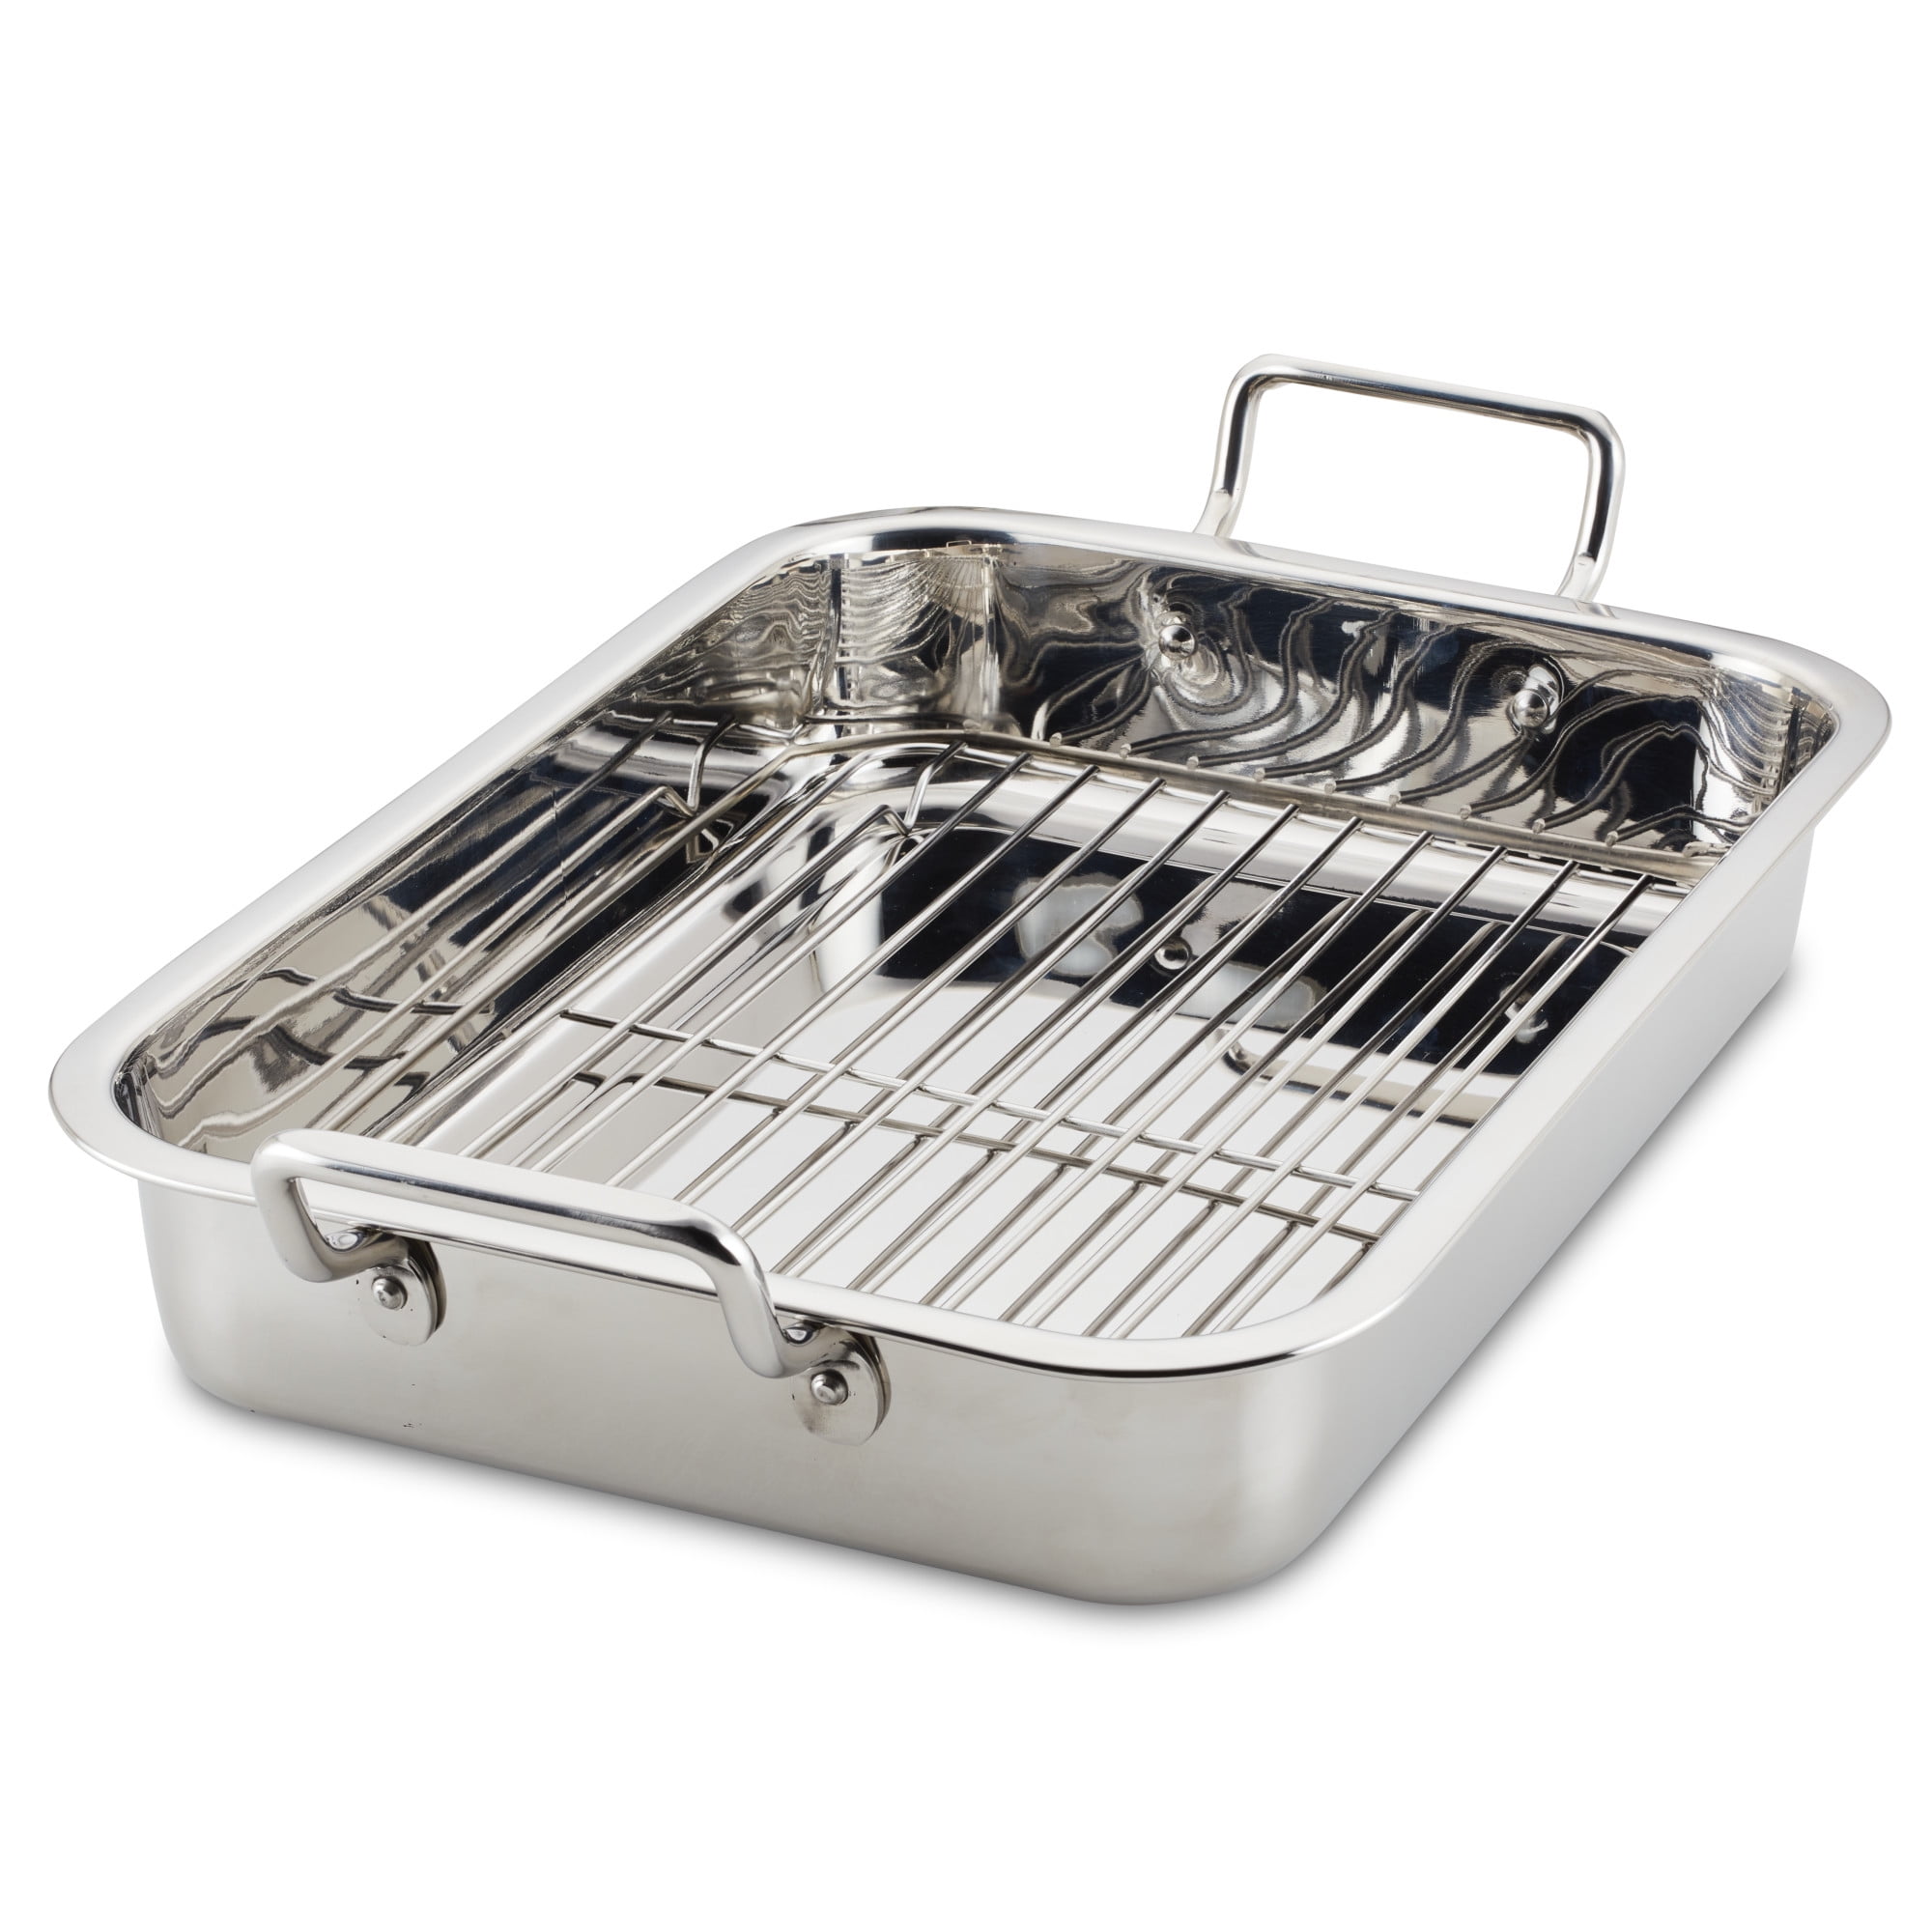 Farberware Classic Traditions Stainless Steel Roaster With Rack 17 